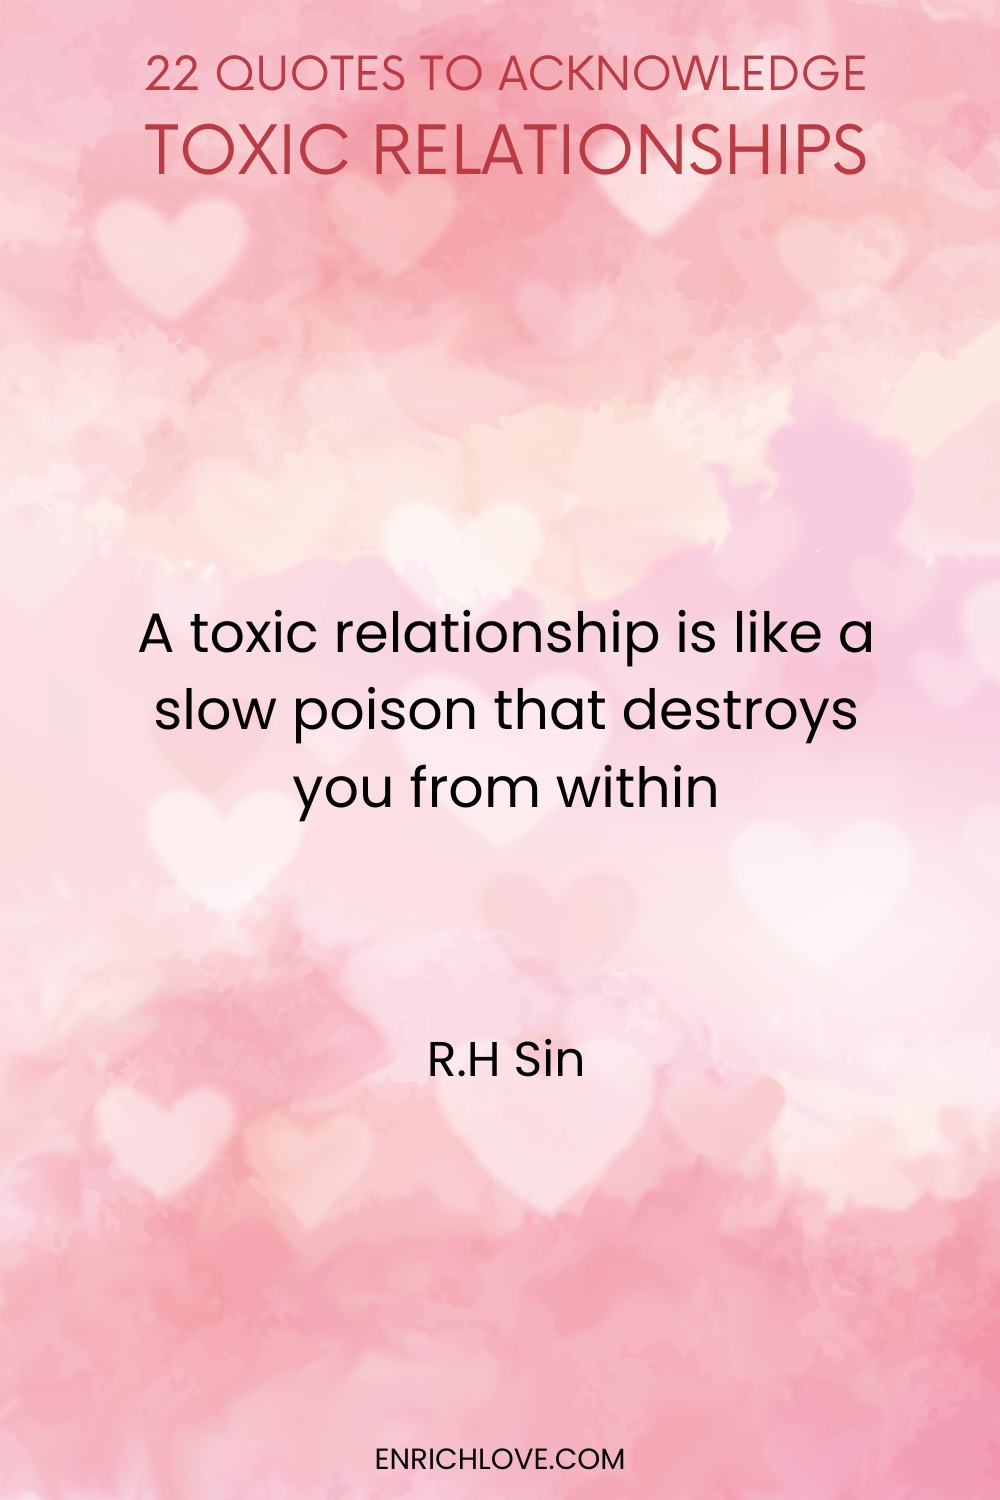 22 Quotes to Acknowledge Toxic Relationships -A toxic relationship is like a slow poison that destroys you from within by R.H Sin